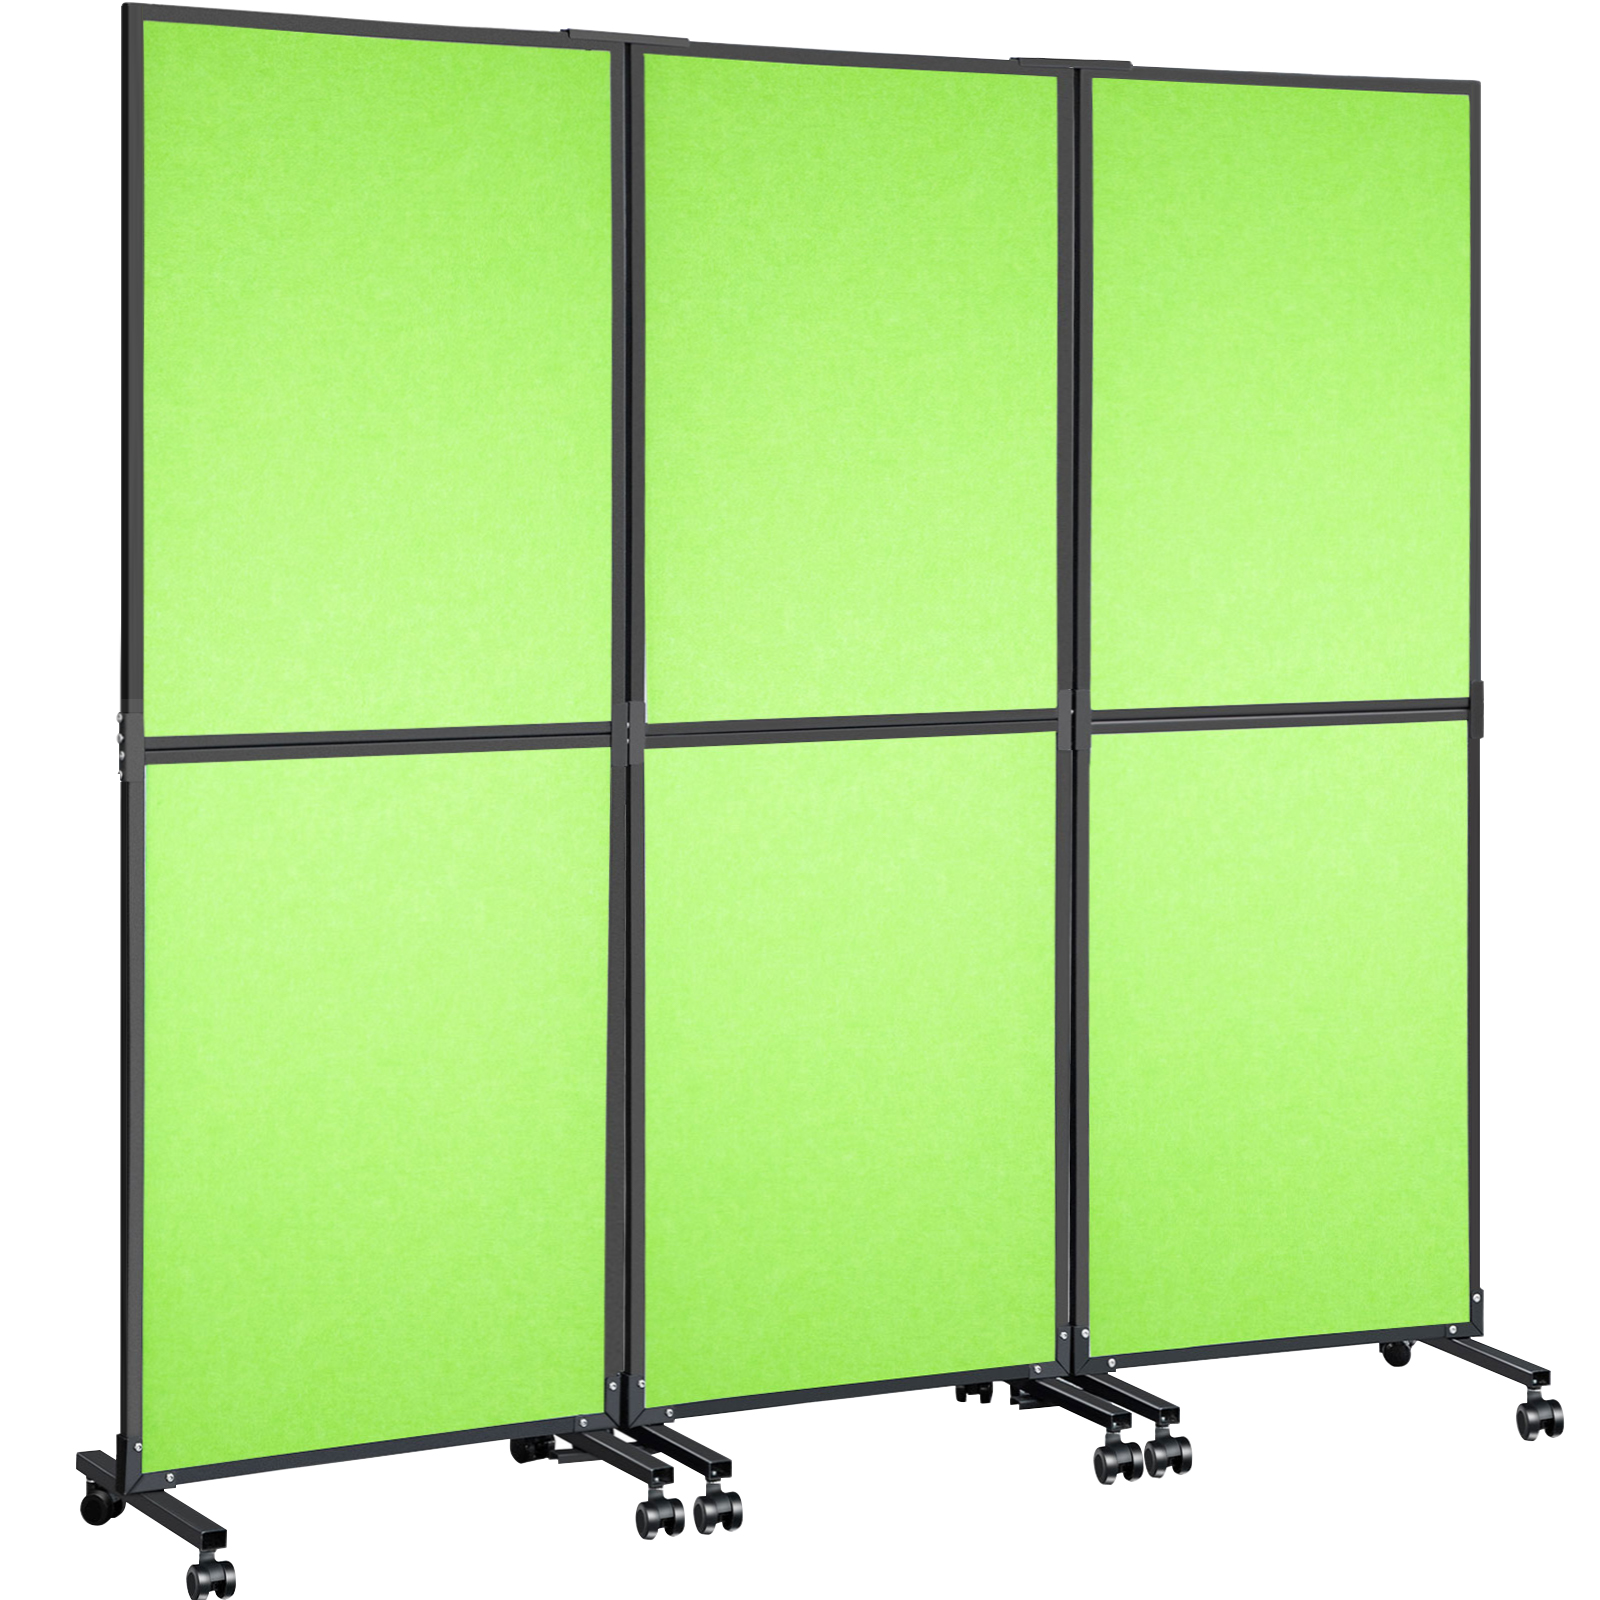 Acrylic Divider Panels, Esports Accessories